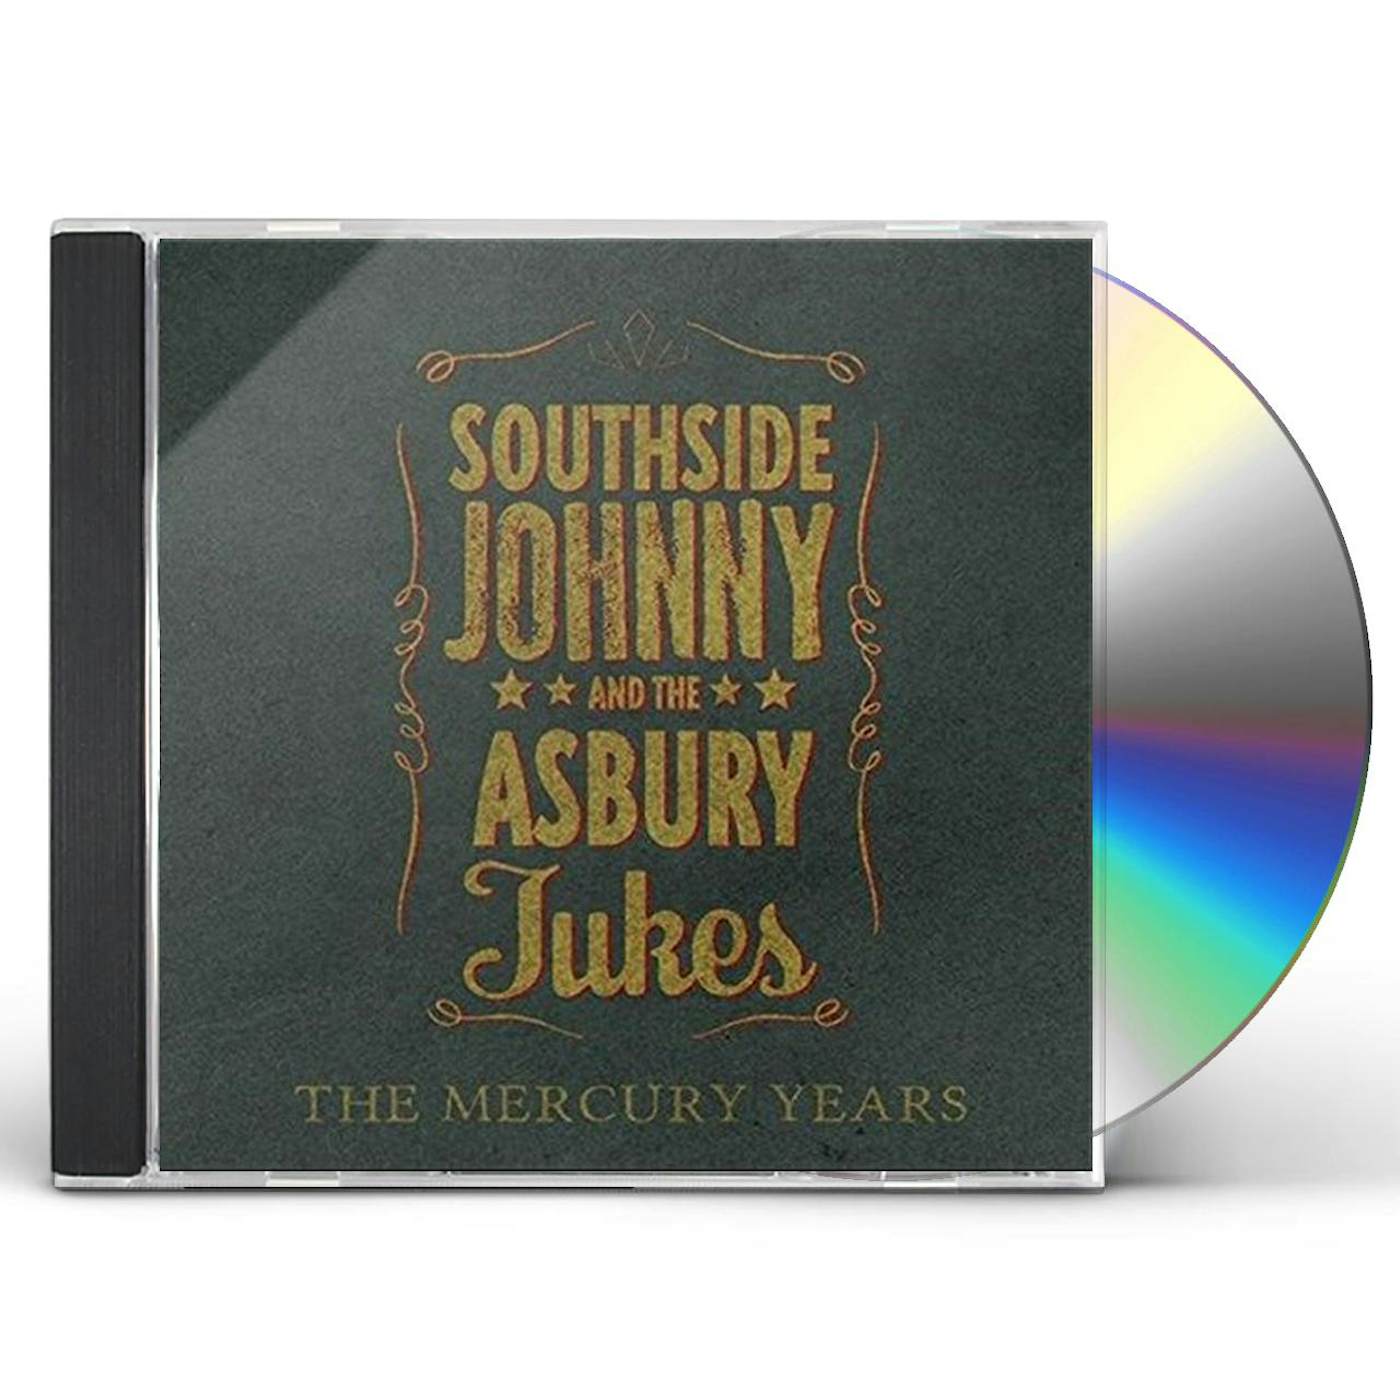 Southside Johnny And The Asbury Jukes MERCURY YEARS CD